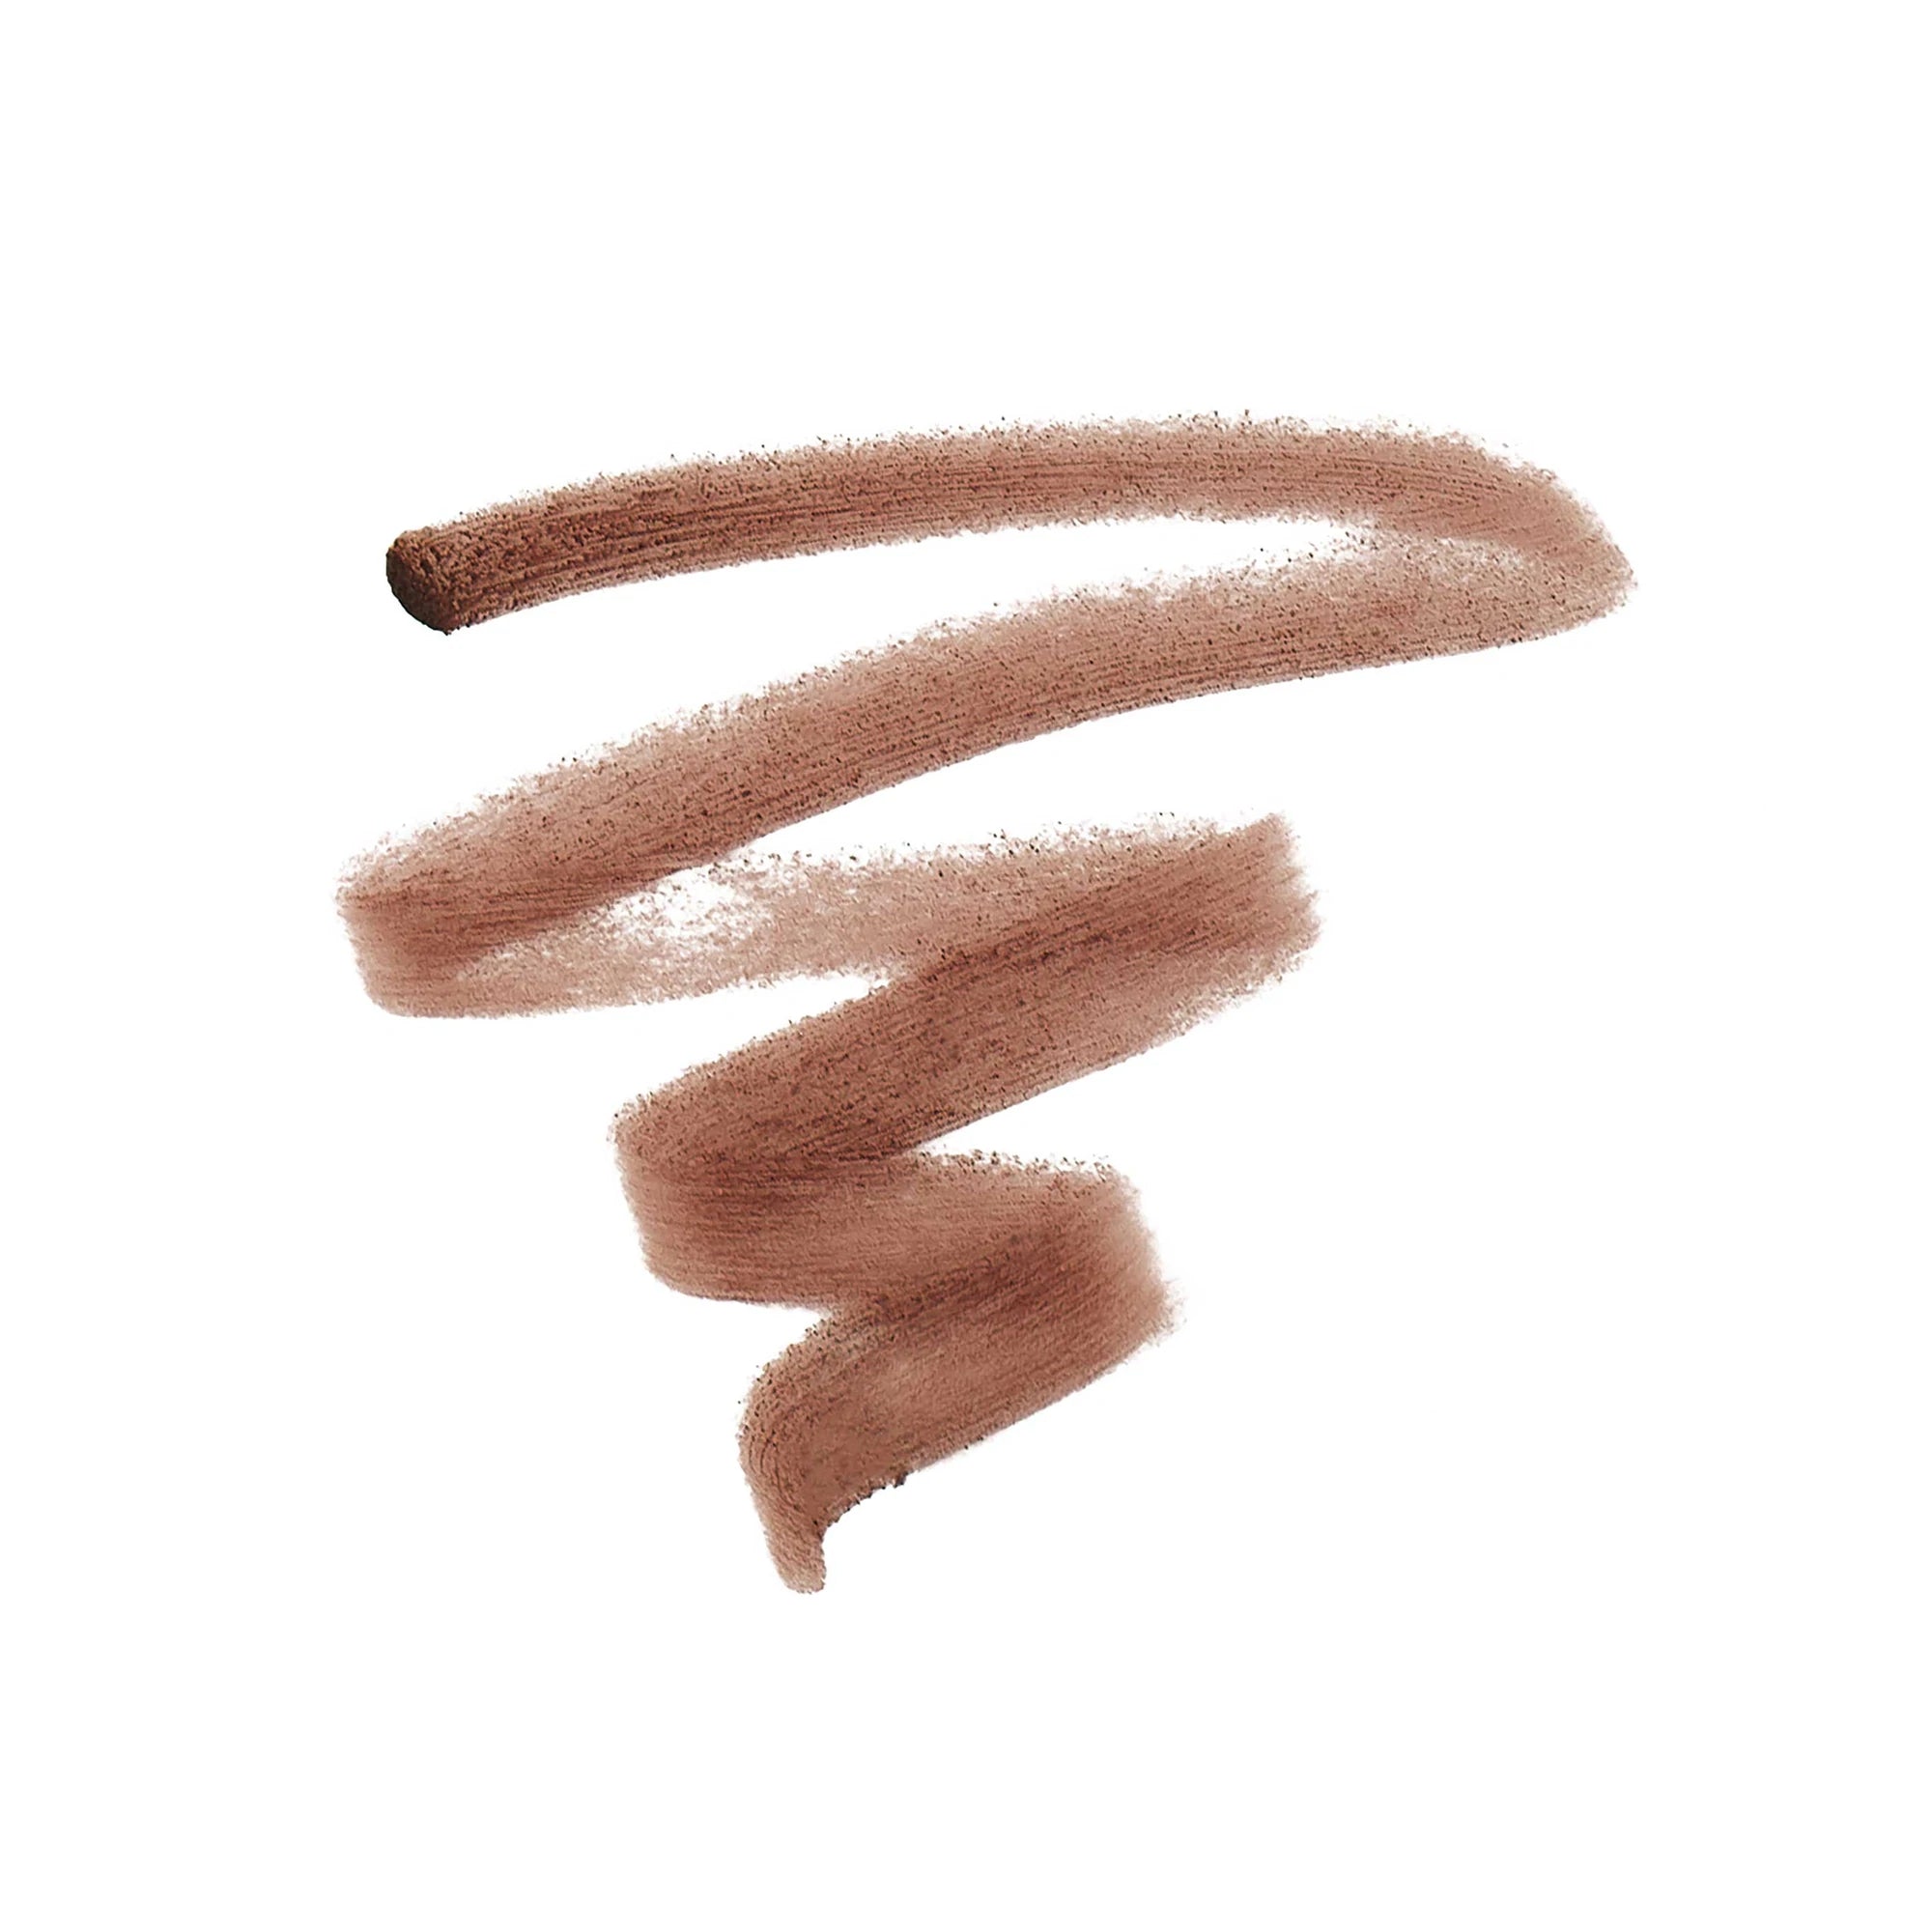 Jane Iredale's Lip Pencil - shade Spice - light pink brown